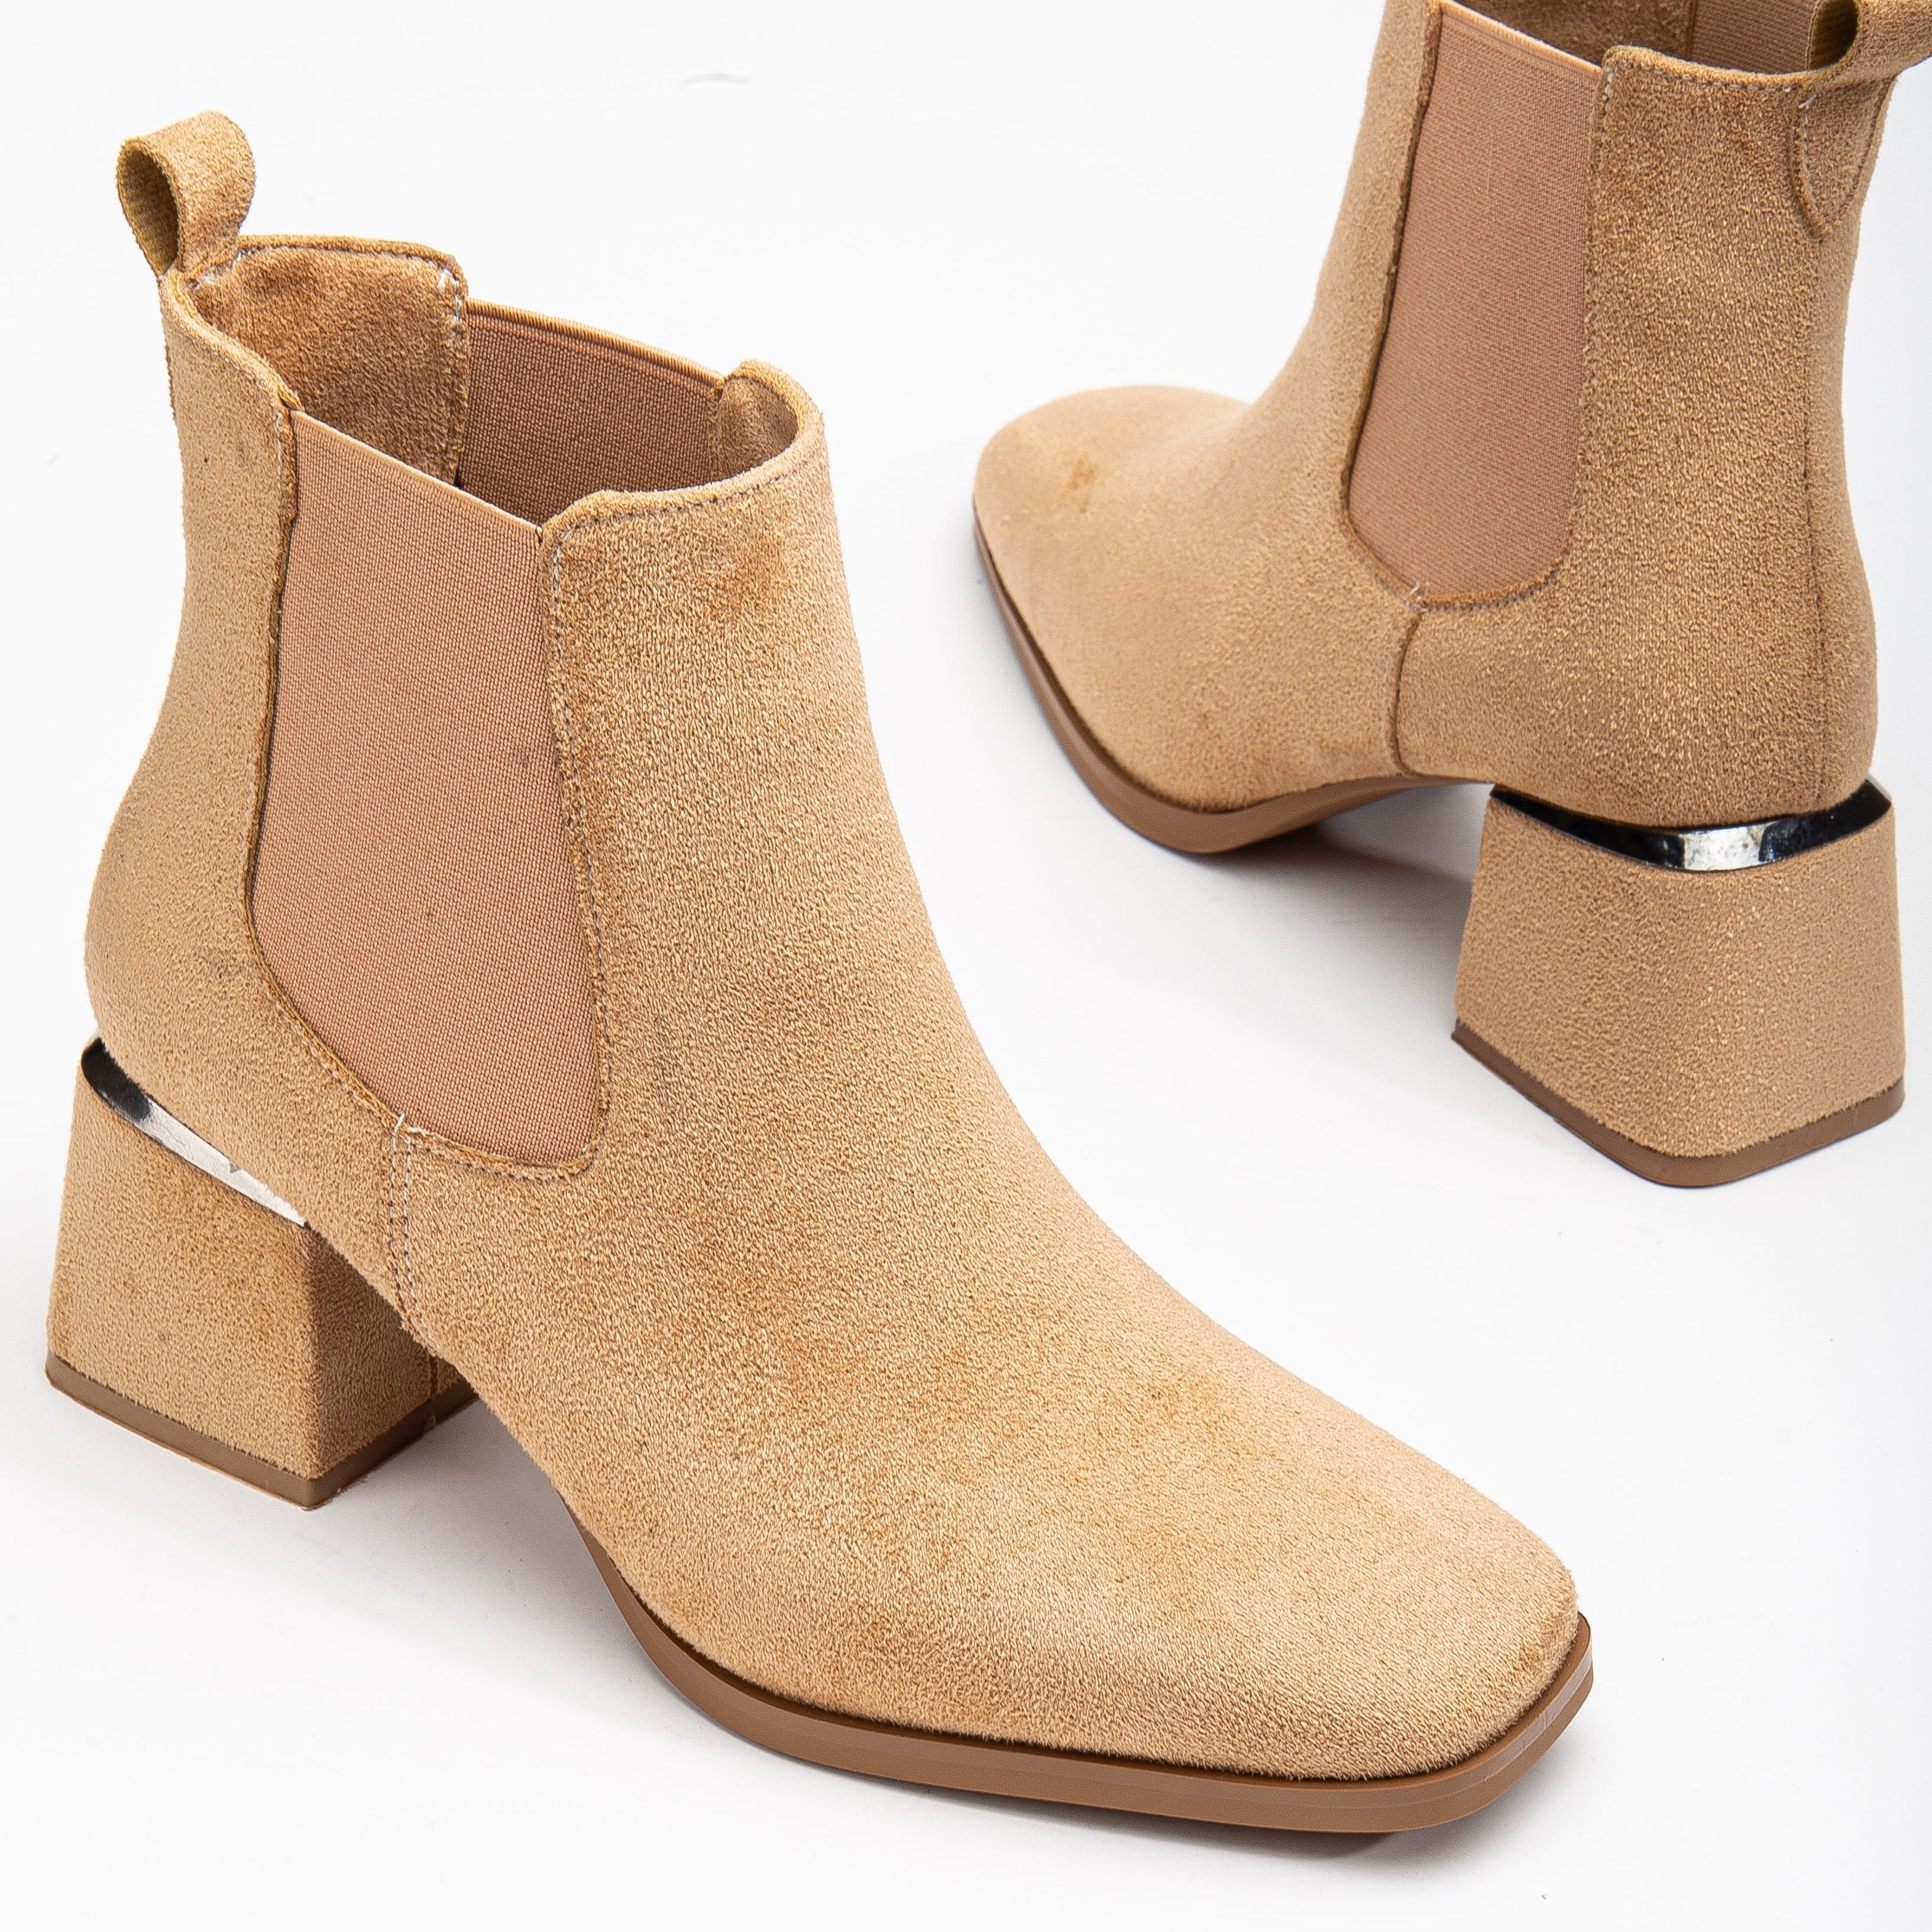 Delilah - Mustard Yellow Ankle Boots